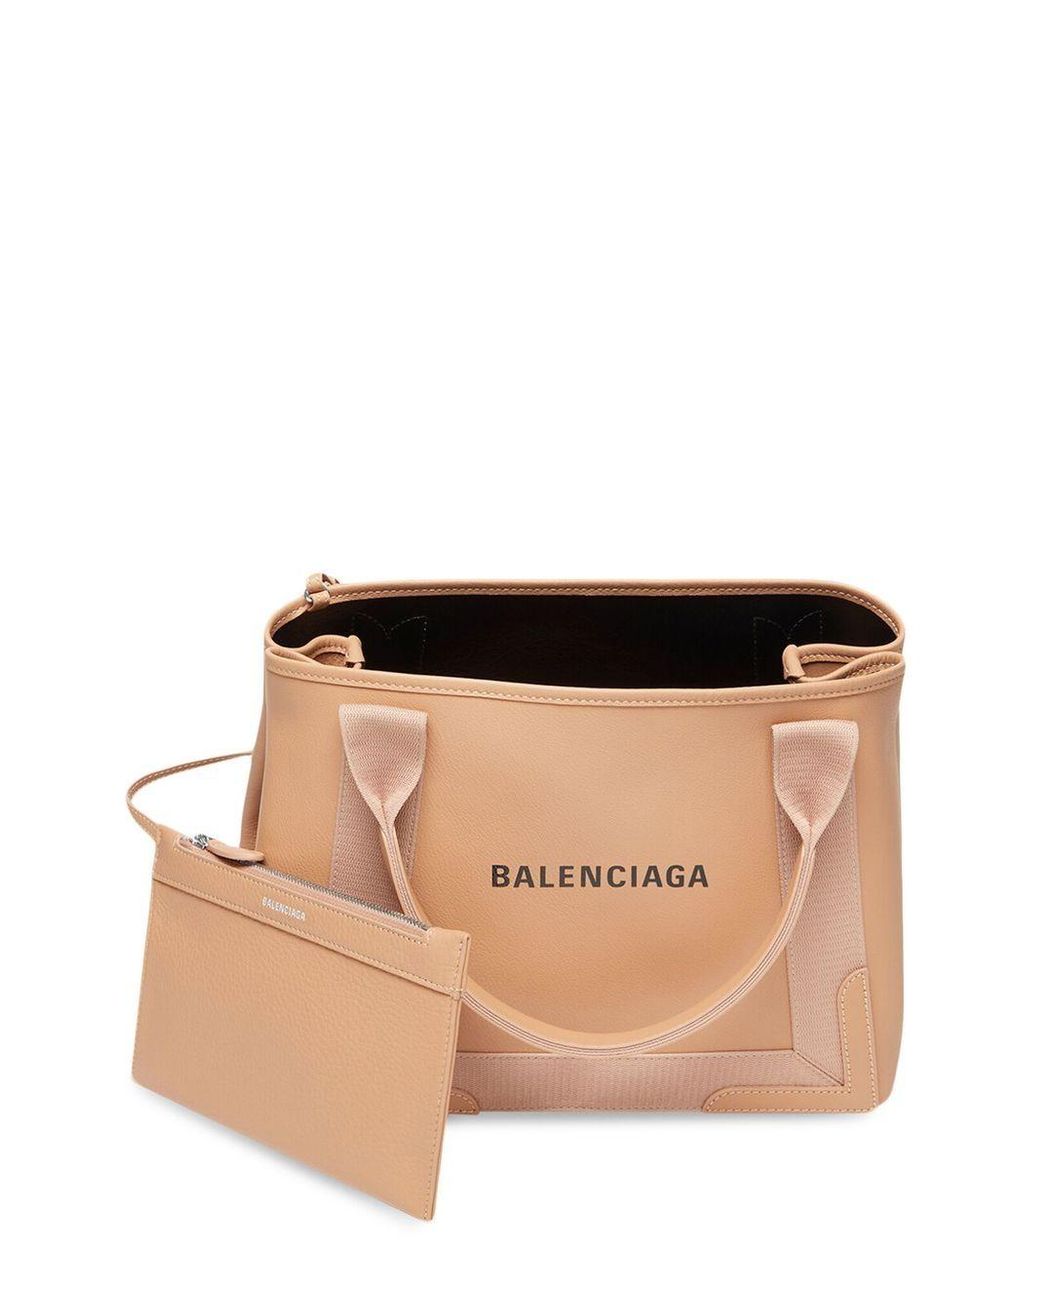 Balenciaga Cabas Leather Tote Bag in Natural | Lyst